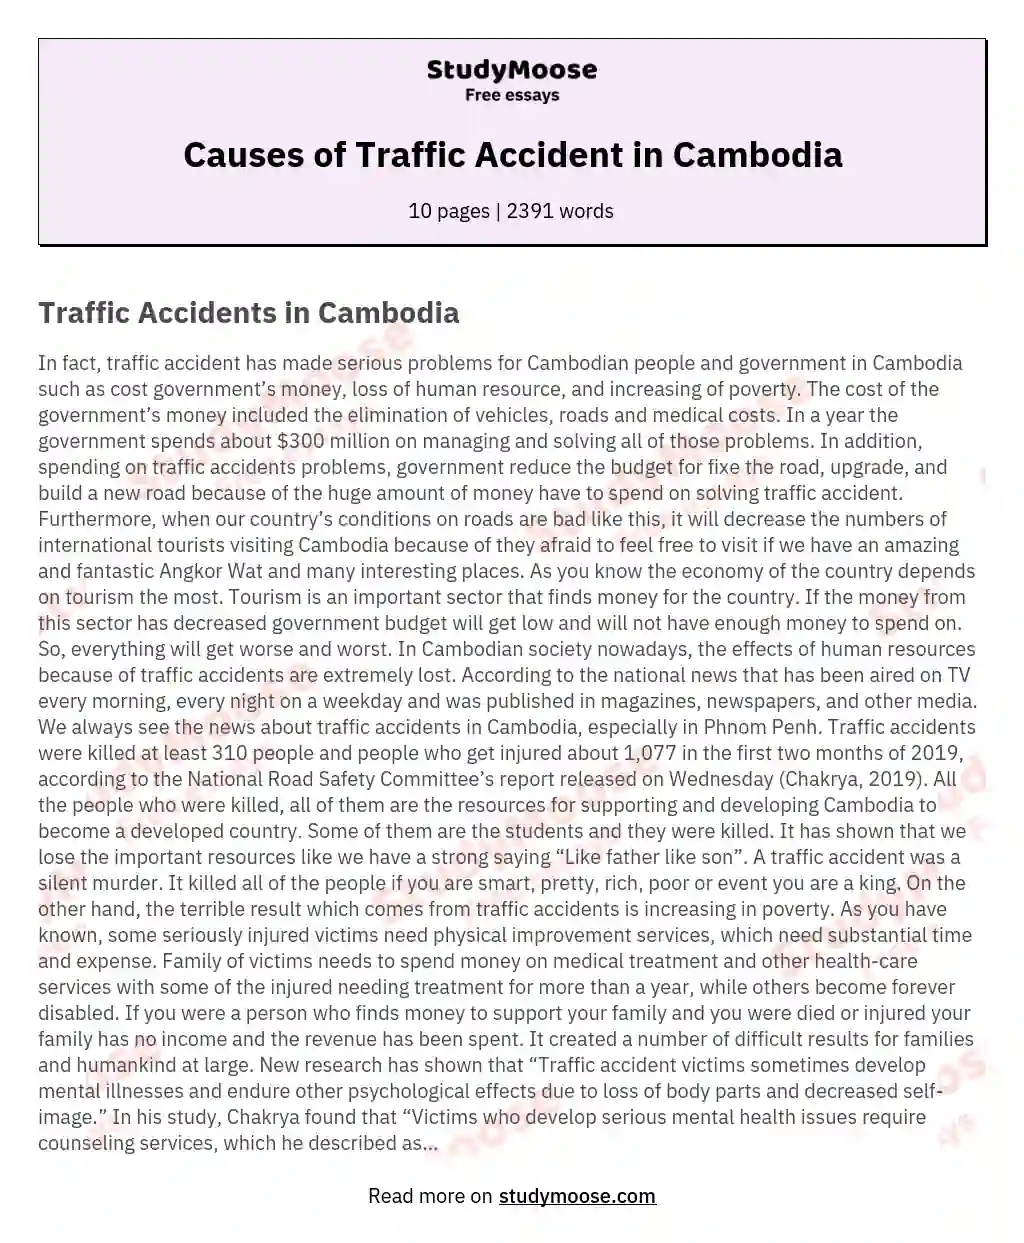 Causes of Traffic Accident in Cambodia